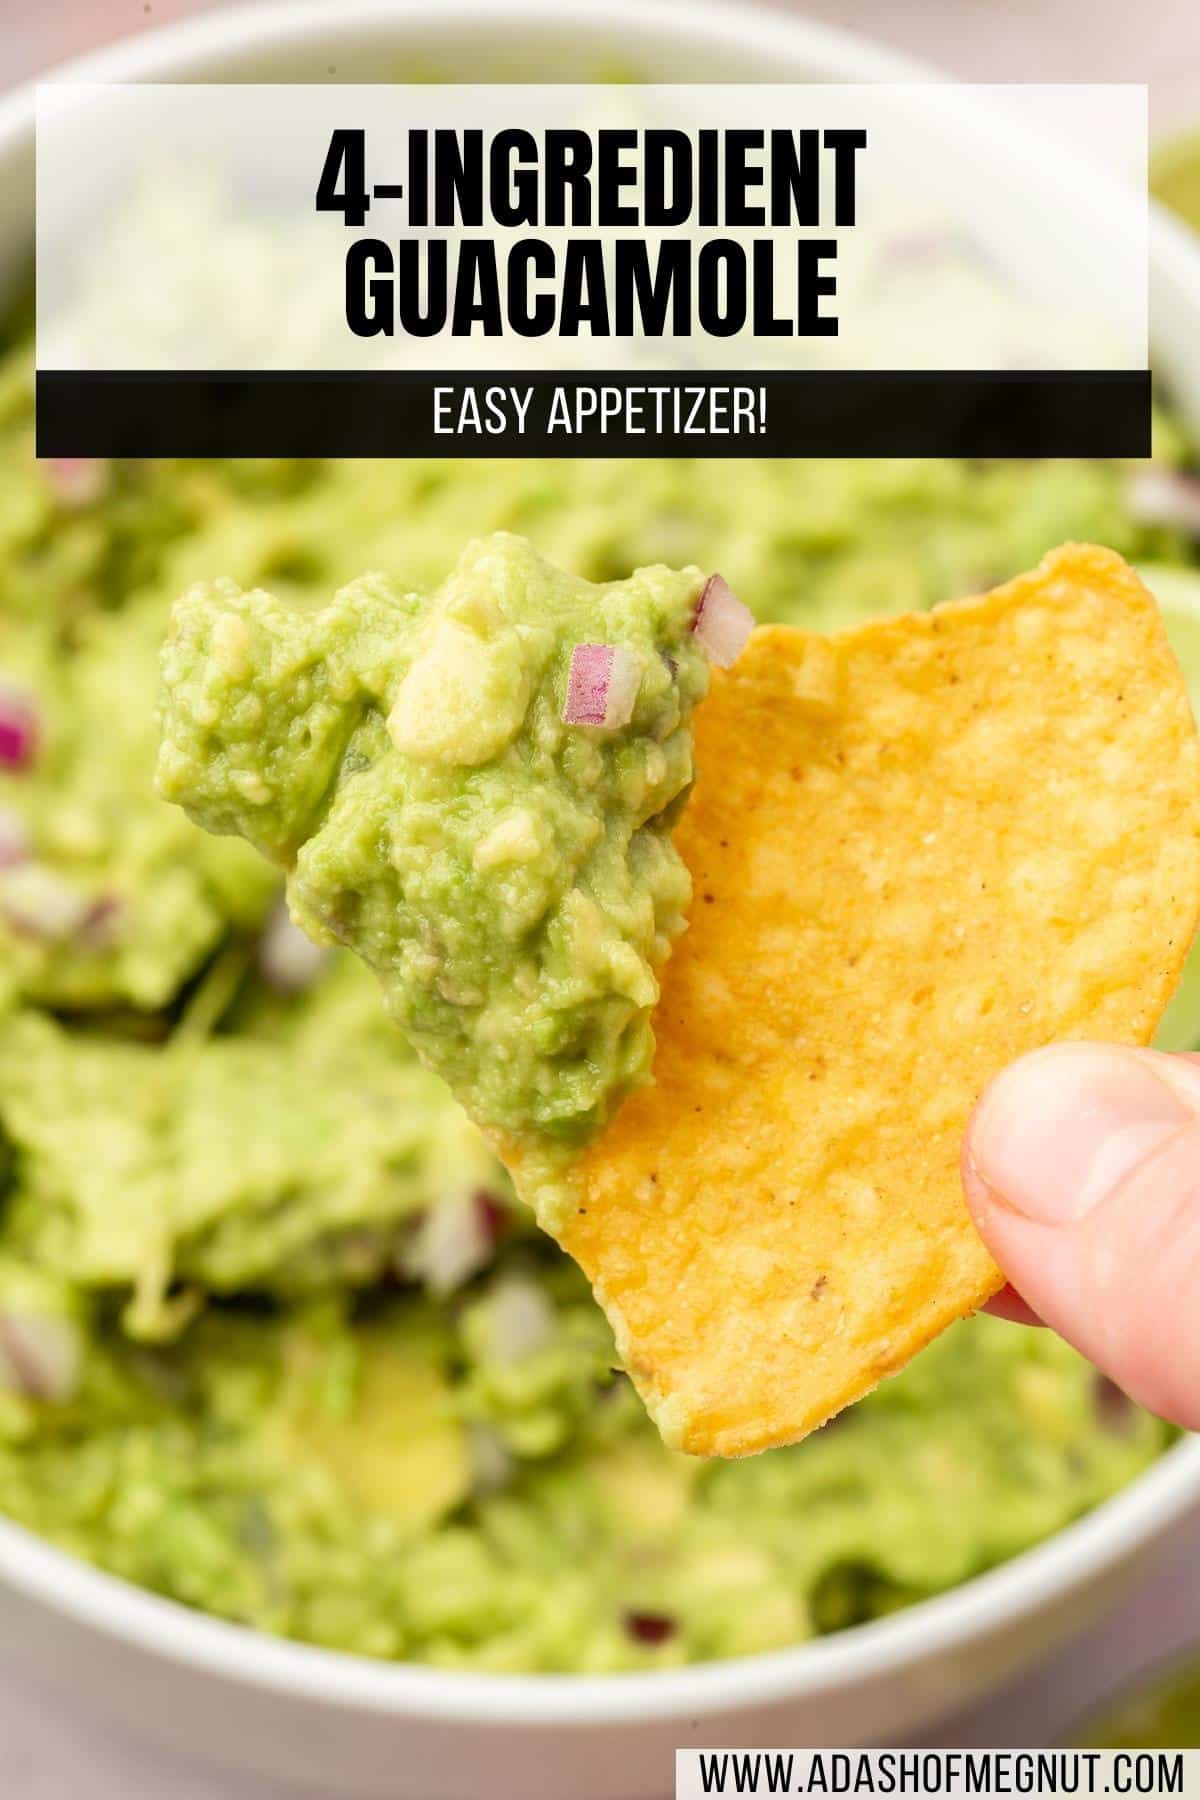 A hand holding a tortilla chip topped with guacamole.